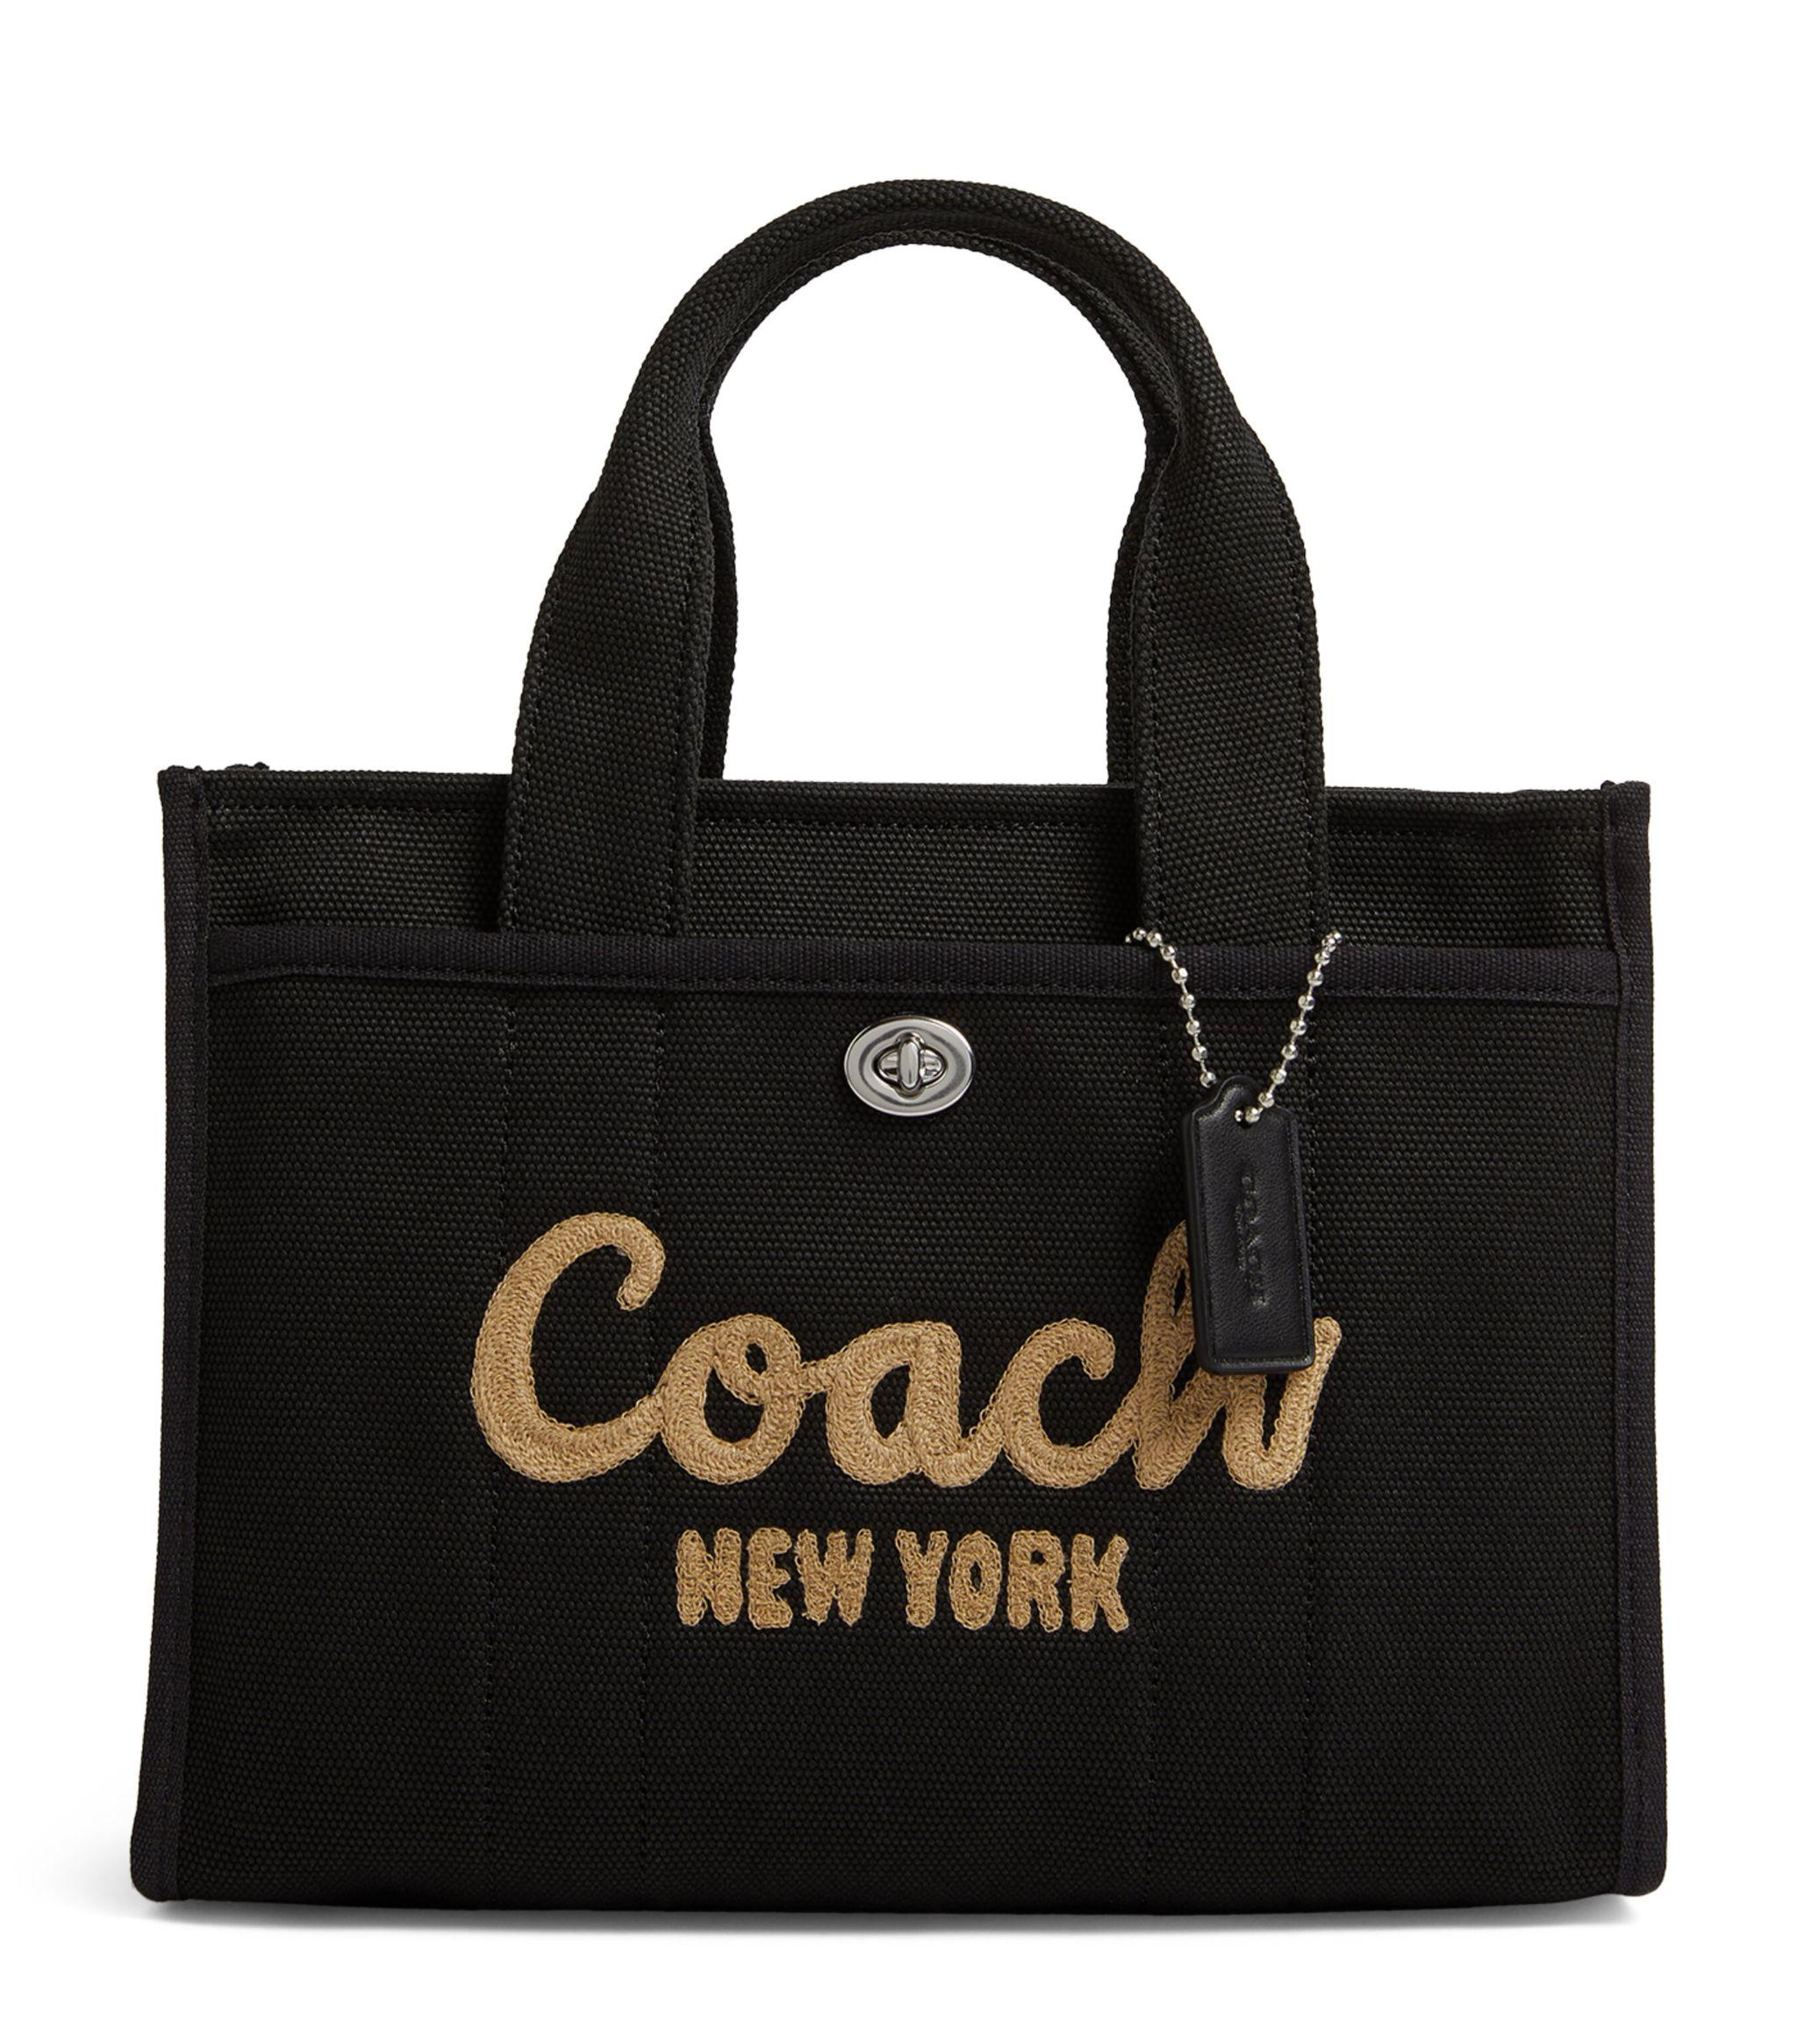 COACH Small Cargo Tote Bag in Black | Lyst